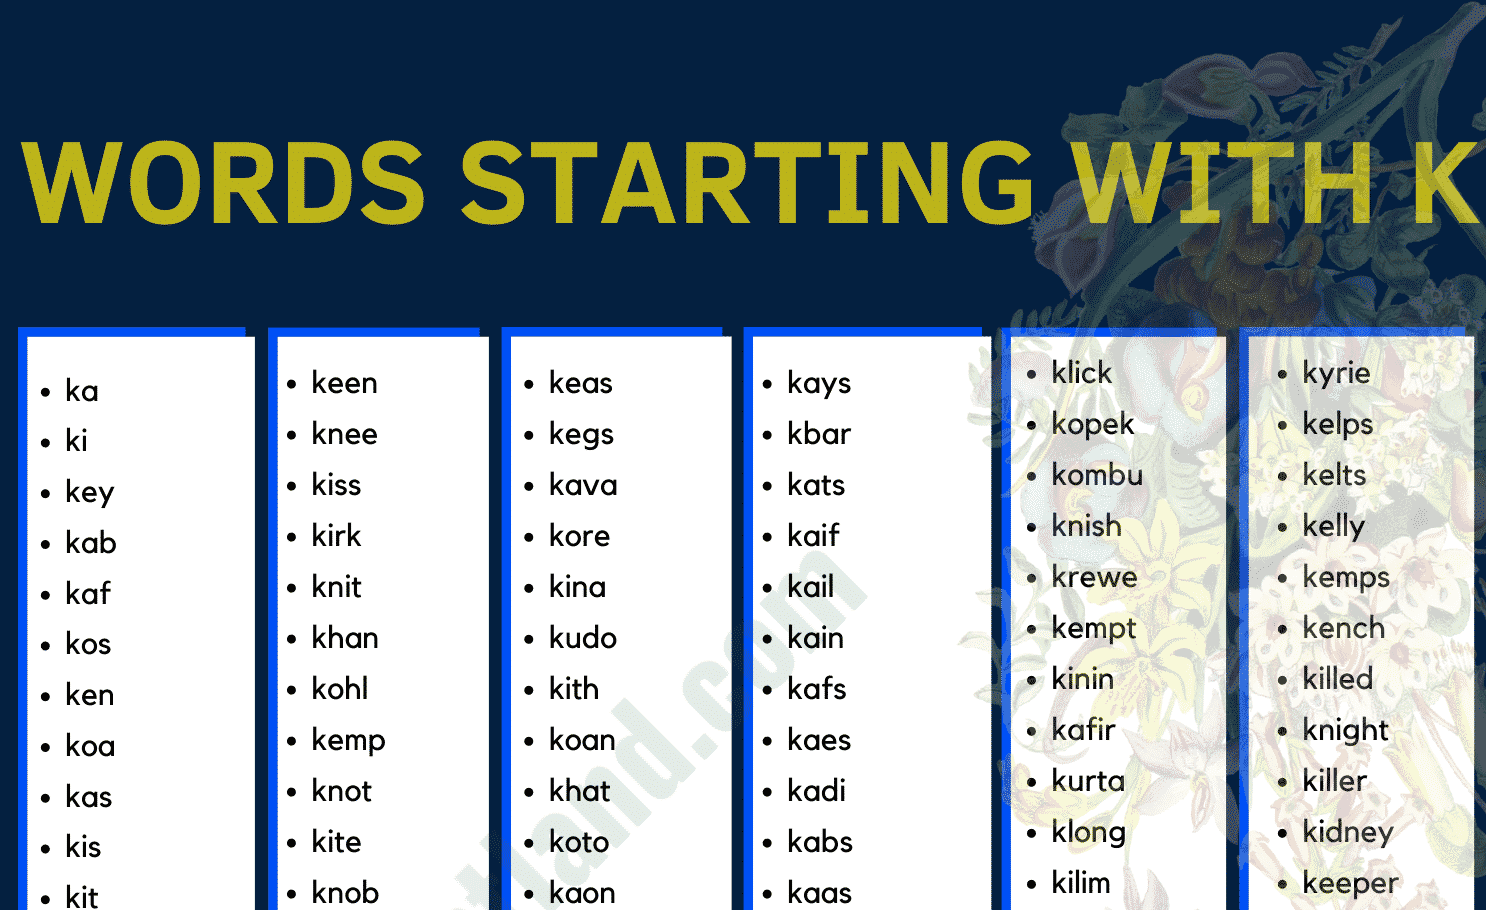 Words That Start With Kas